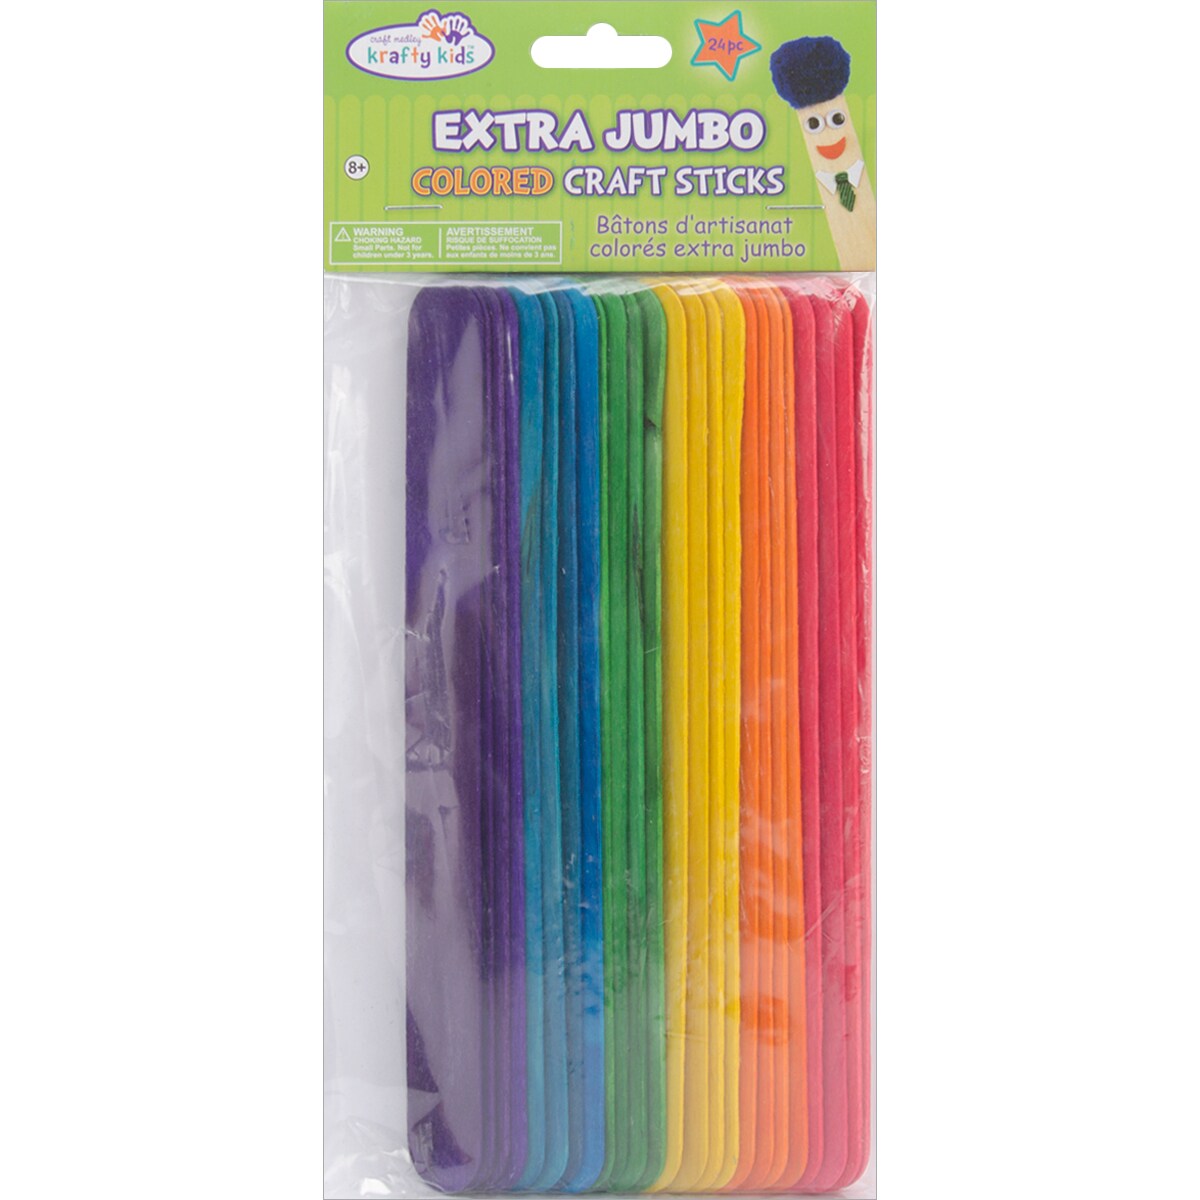 Extra Jumbo Colored Craft Sticks - Large Pack - The Craft Shop, Inc.